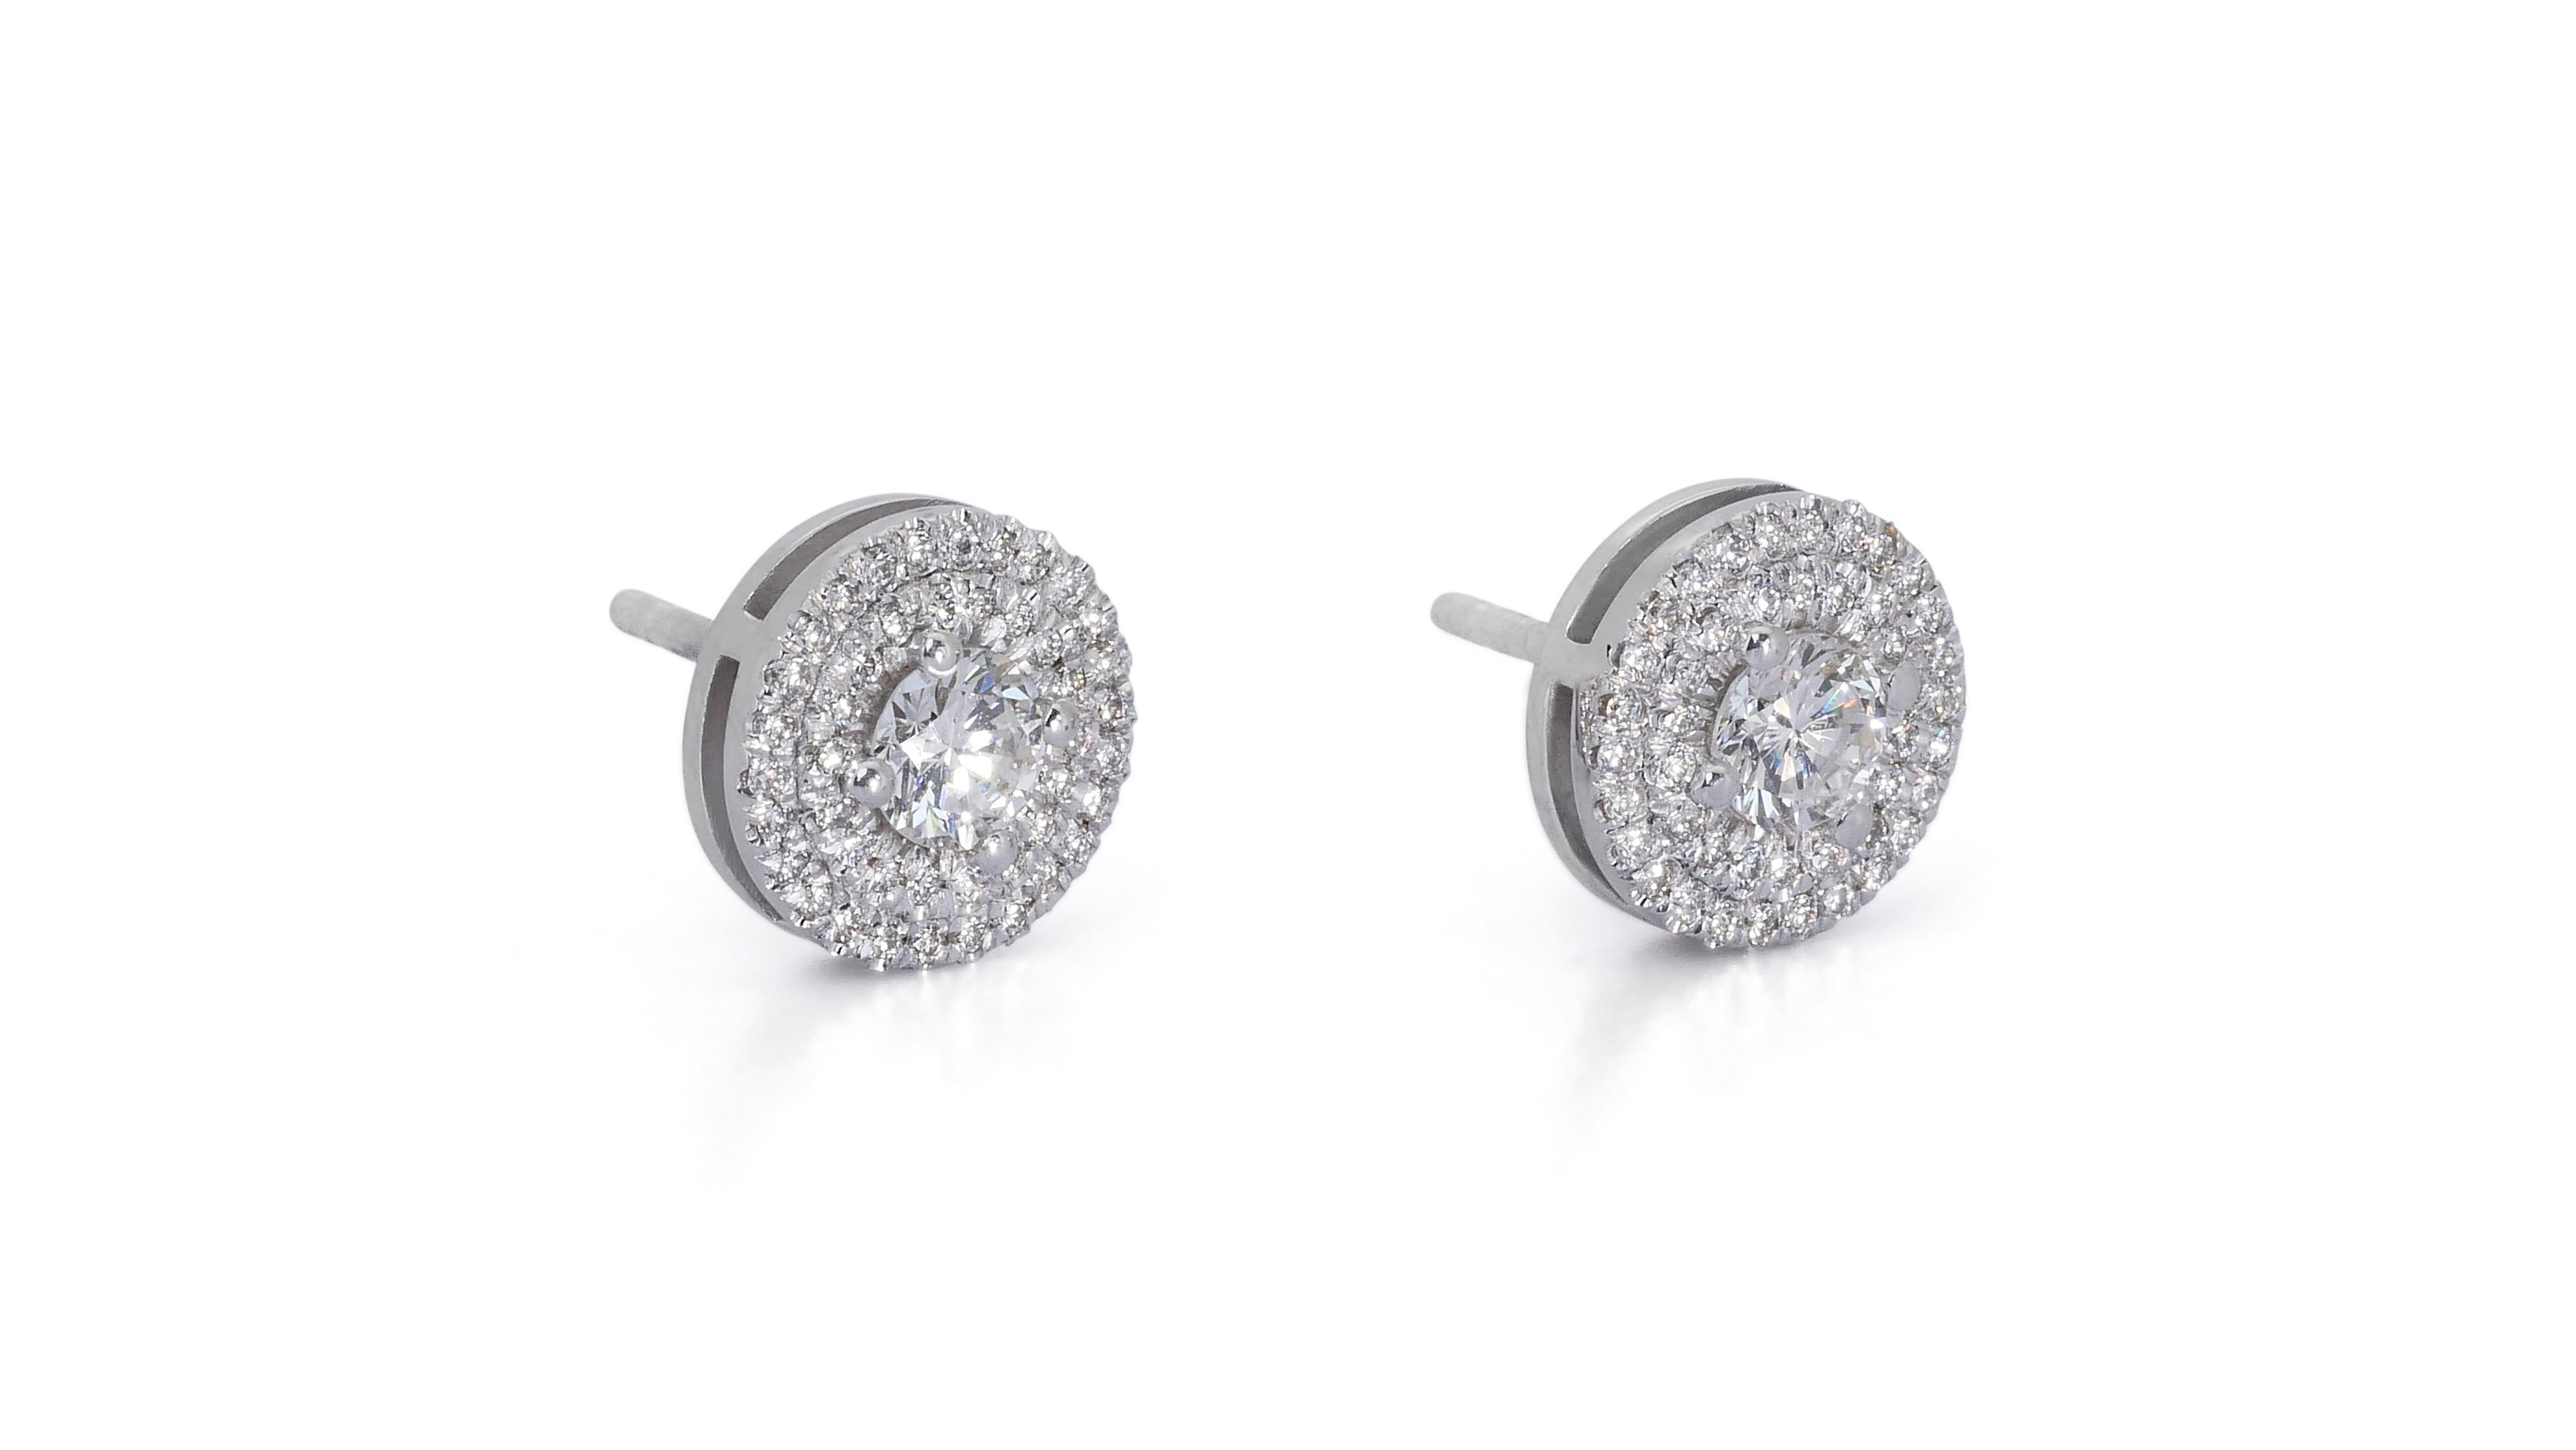 Round Cut Radiant 1.20ct Diamonds Halo Stud Earrings in 18k White Gold - GIA Certified For Sale